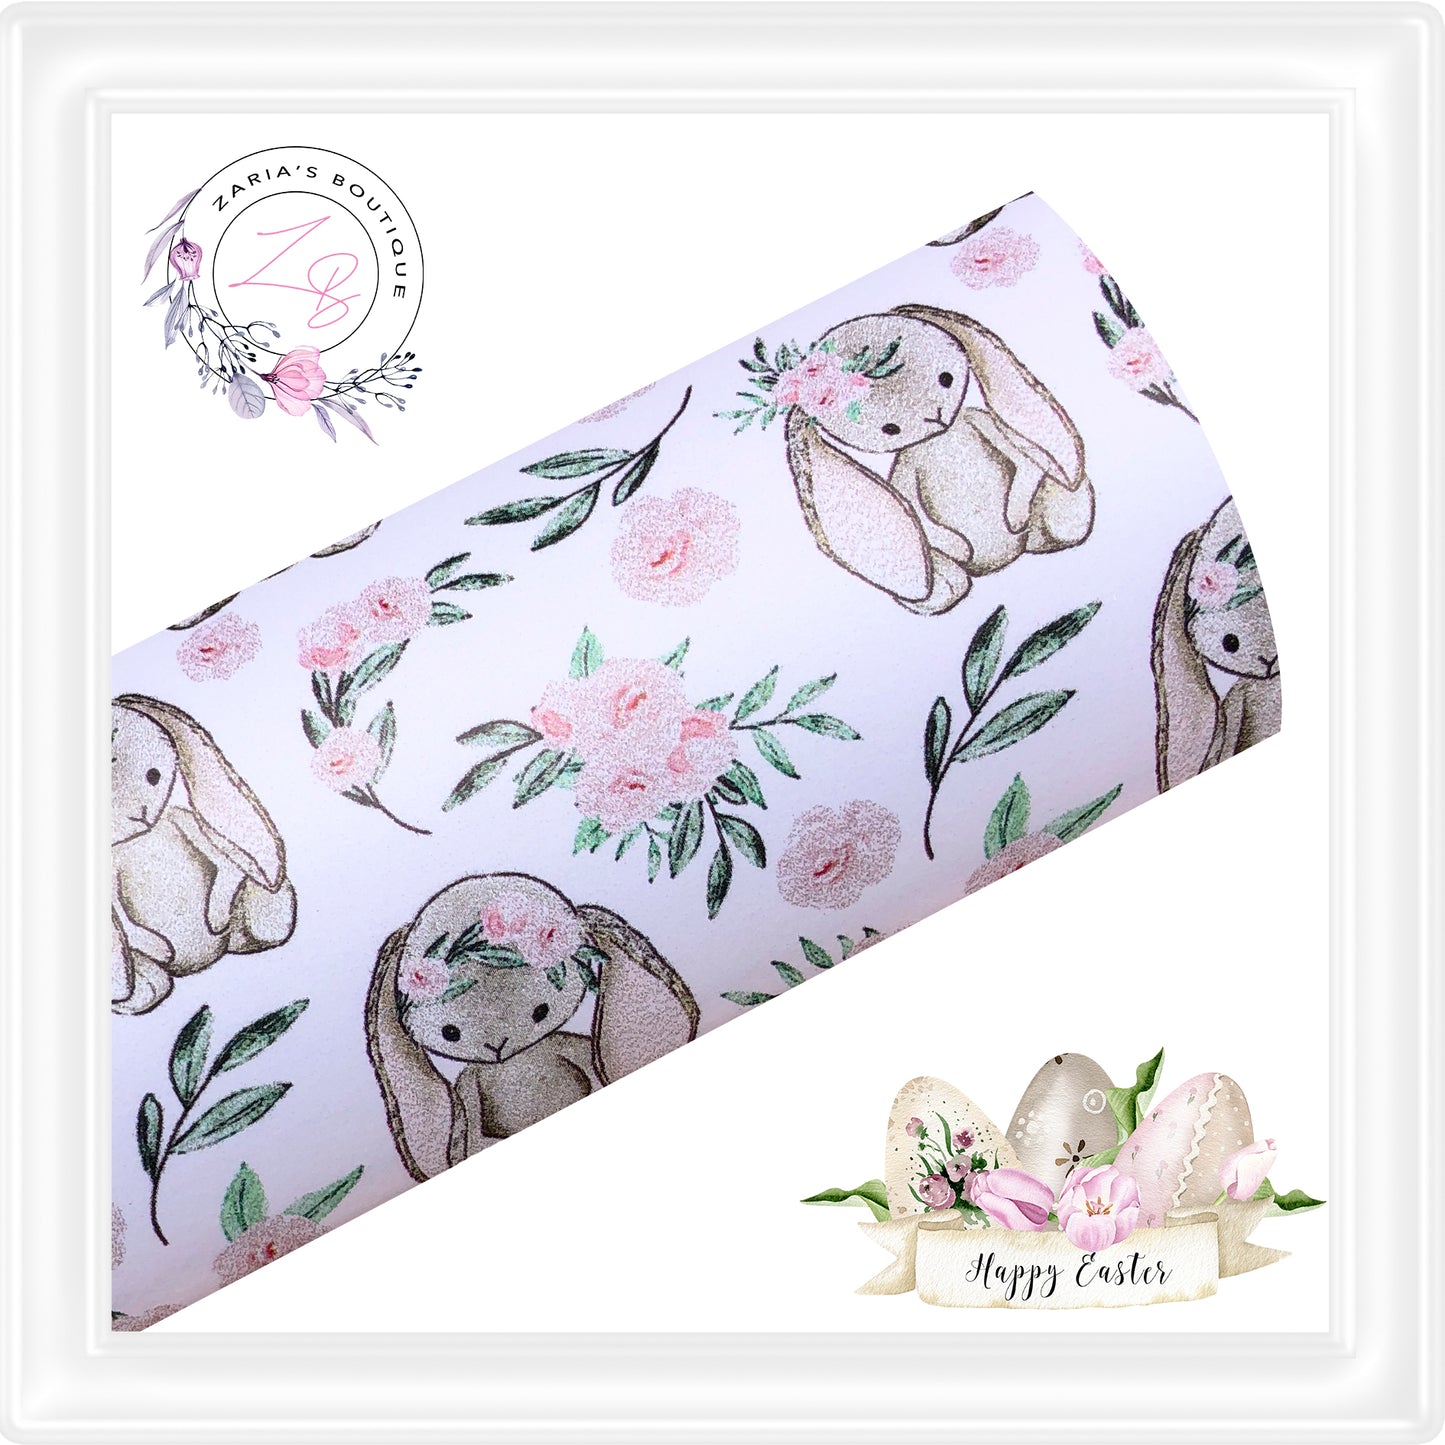 • Lovely Bunnies • Smooth Faux Leather • MATCHING Resins!